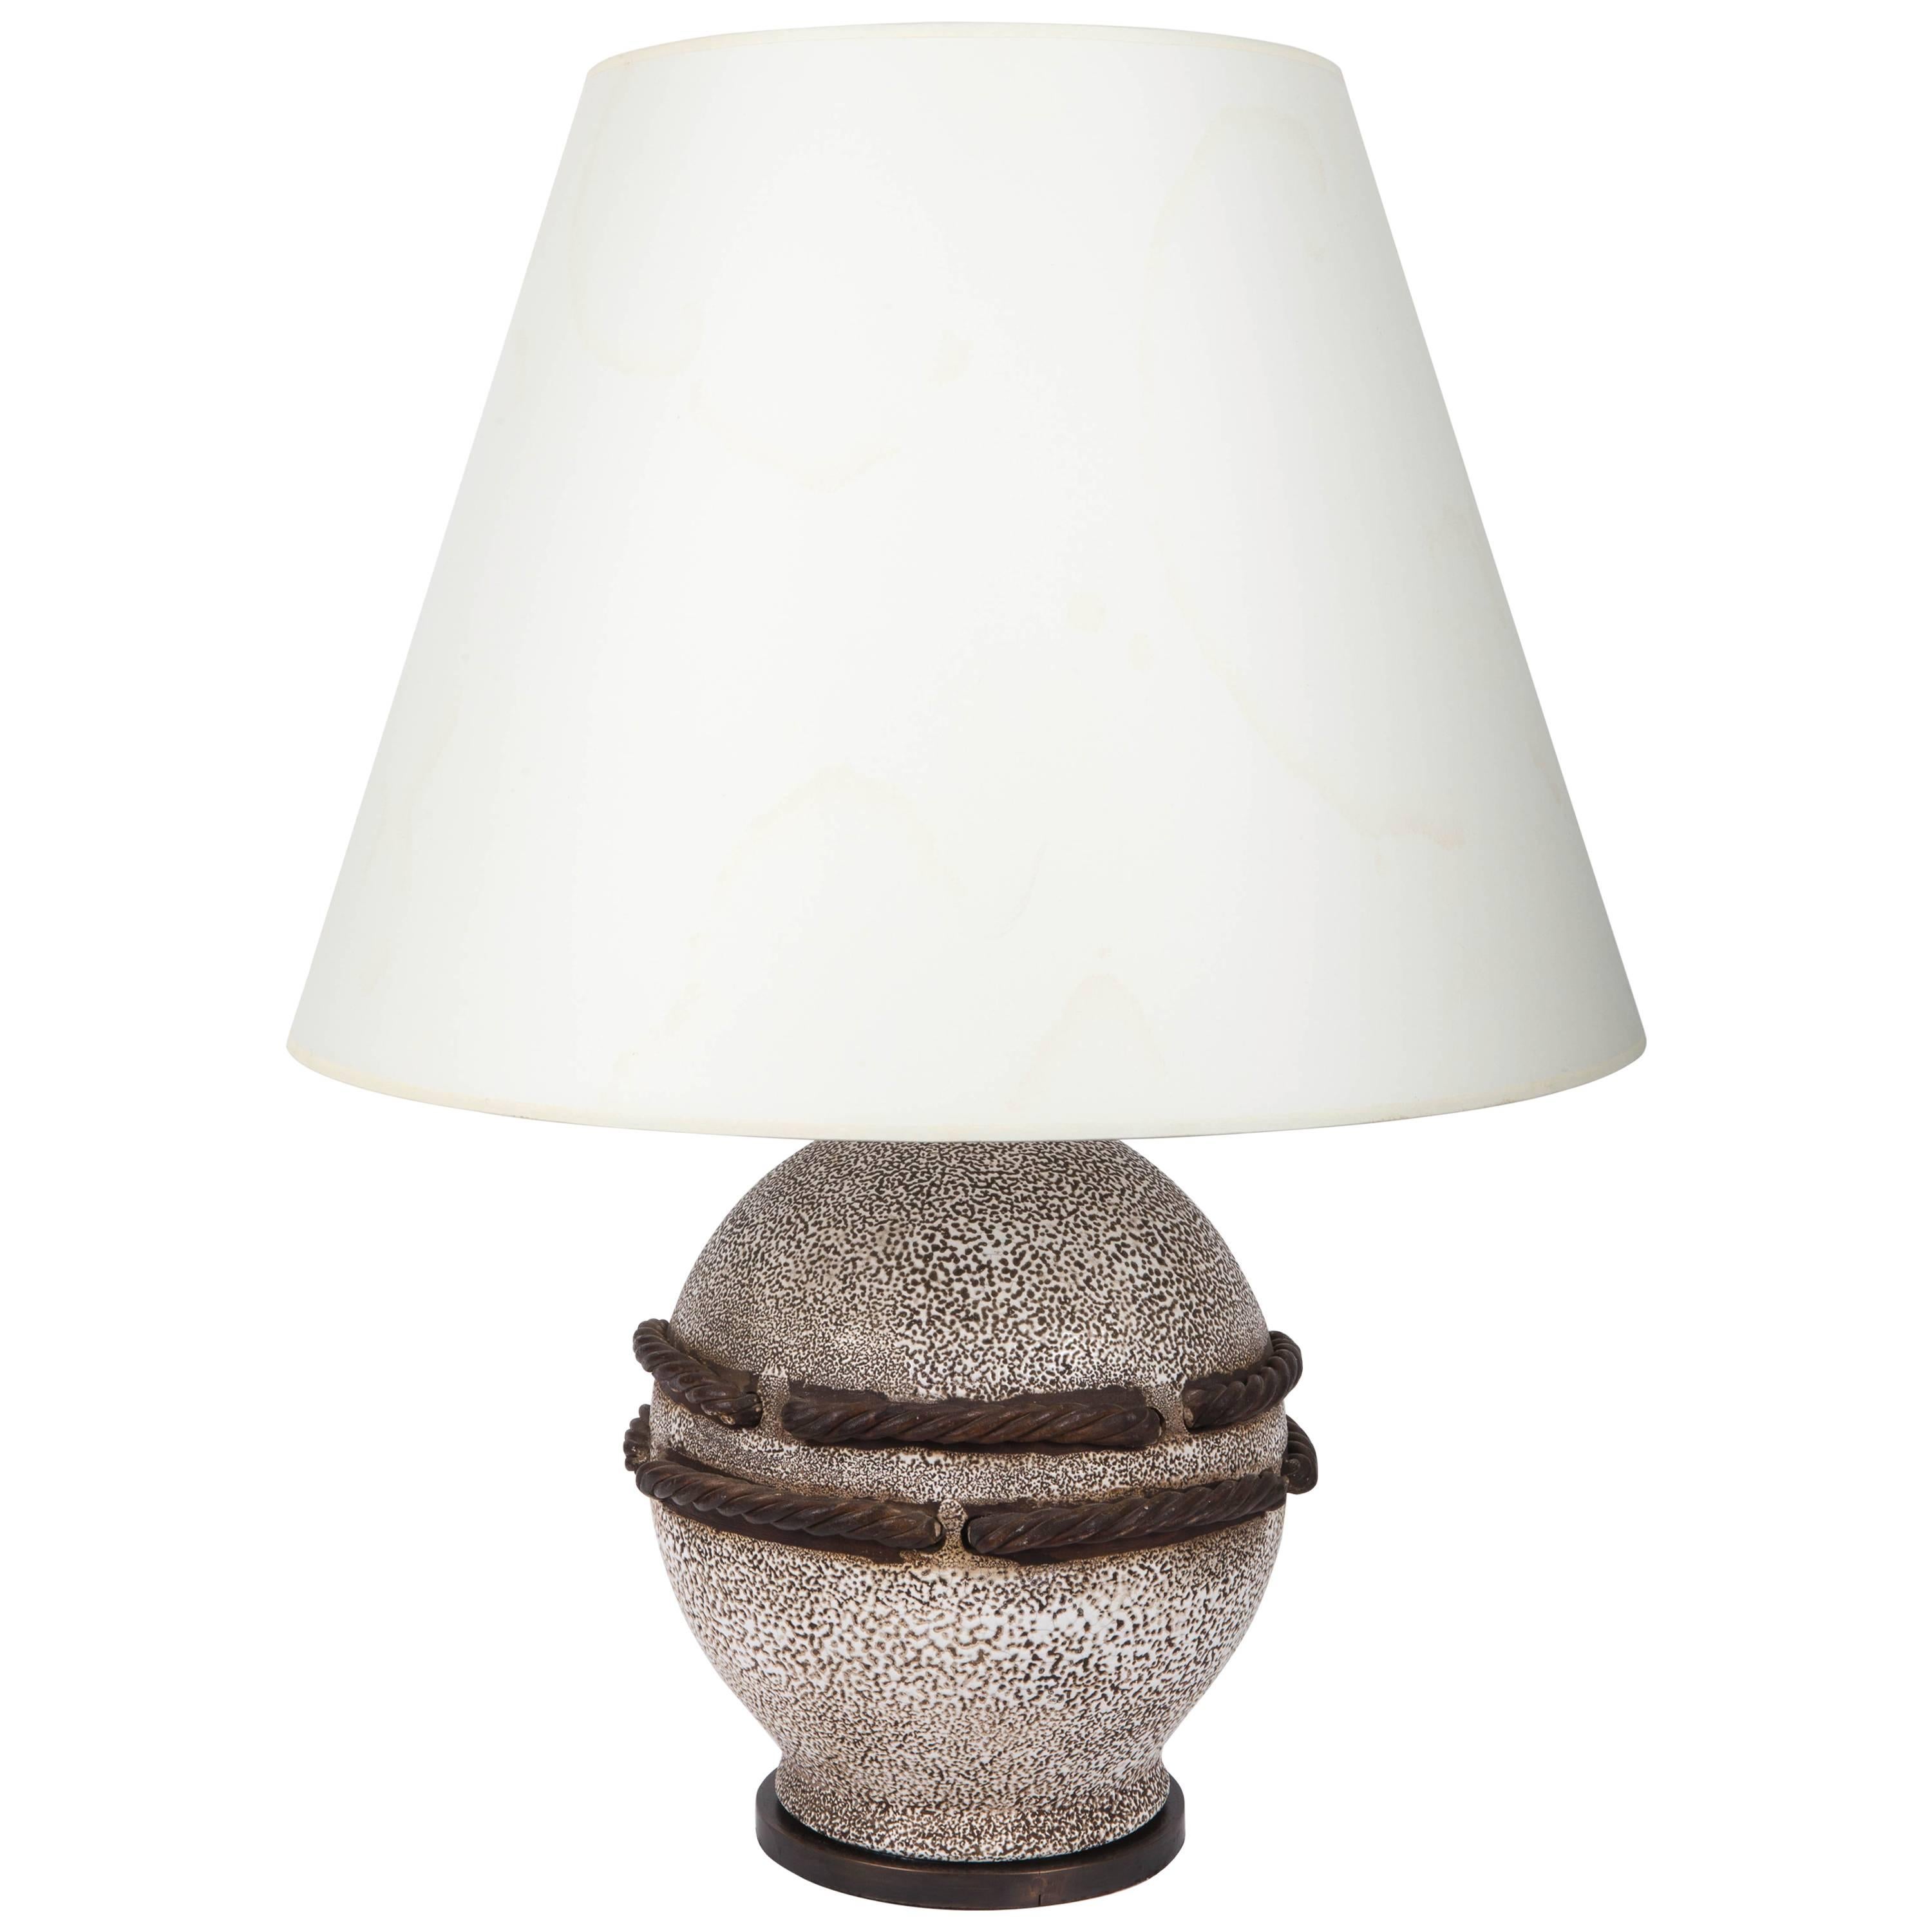 Ivory Stone Enameled Lamp with Brown Rope Detailing